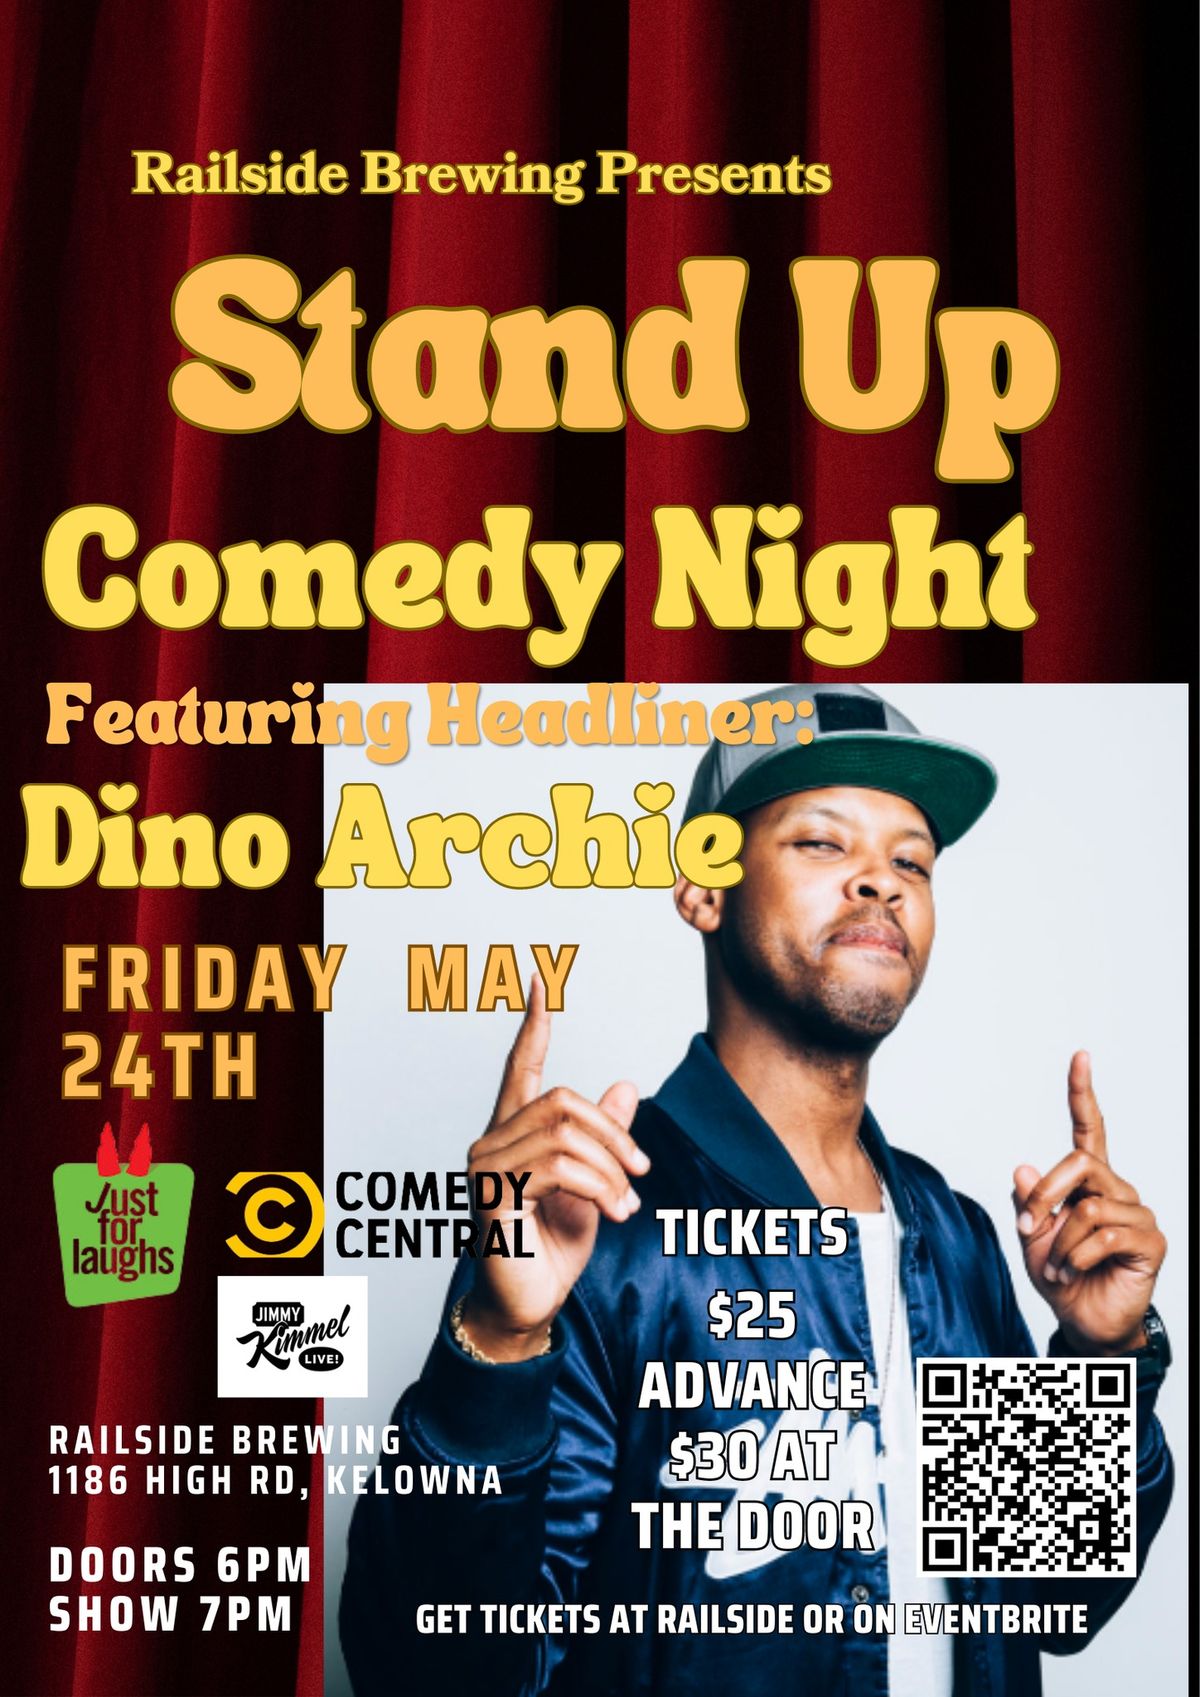 Standup Comedy Night at Railside ft. Dino Archie!